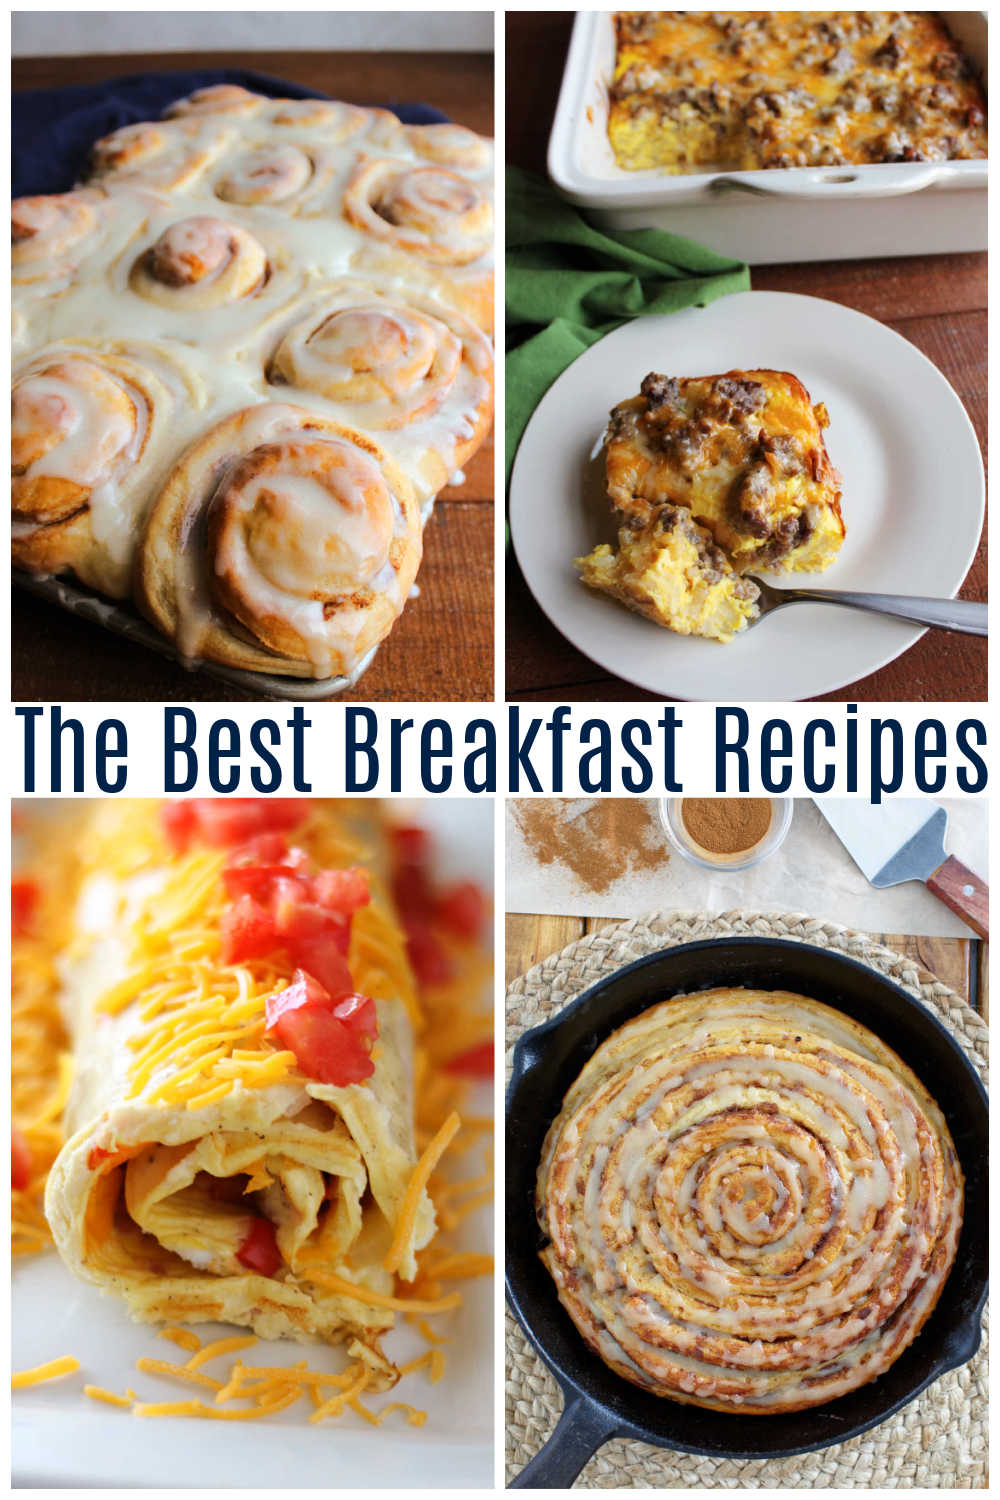 If you are looking for new breakfast recipes to try, you are in the right place. We have everything from eggs and oatmeal to cinnamon rolls and muffins. Pick out a recipe or two to try today.